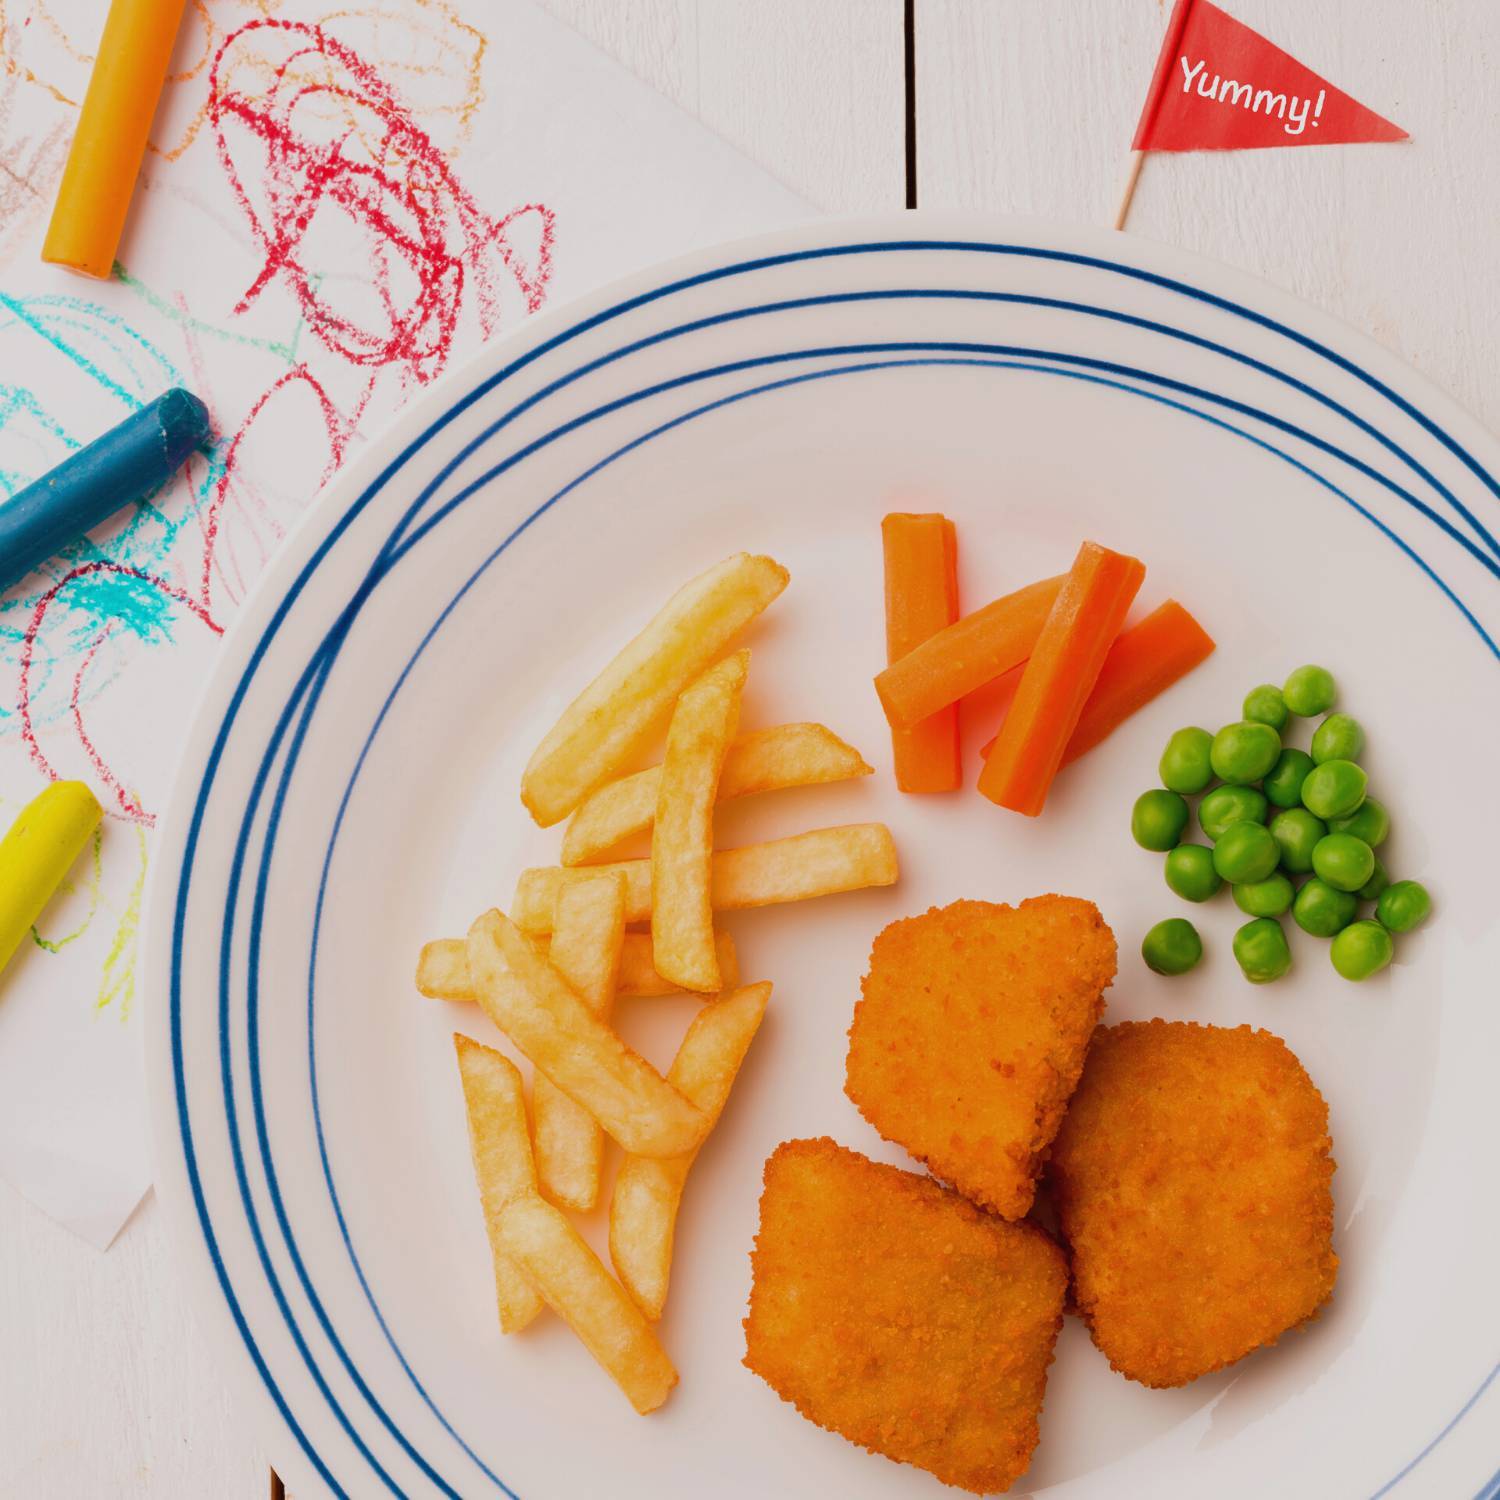 Image for Kids Meals category